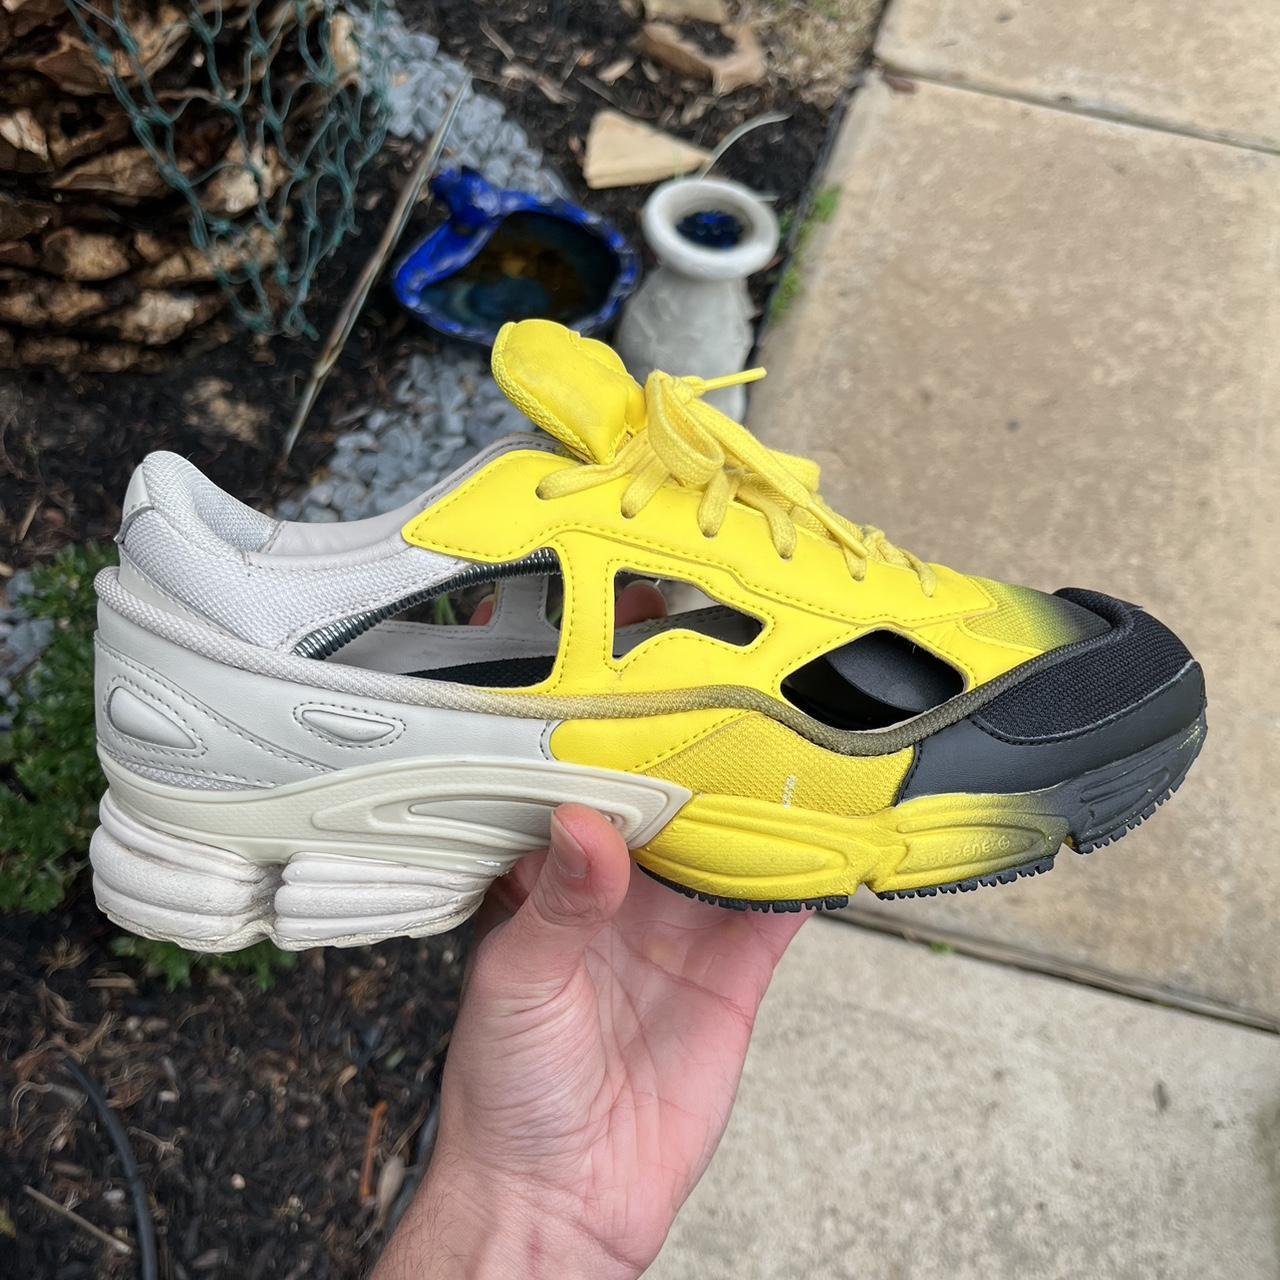 Raf Simons Men's Yellow and Black Trainers